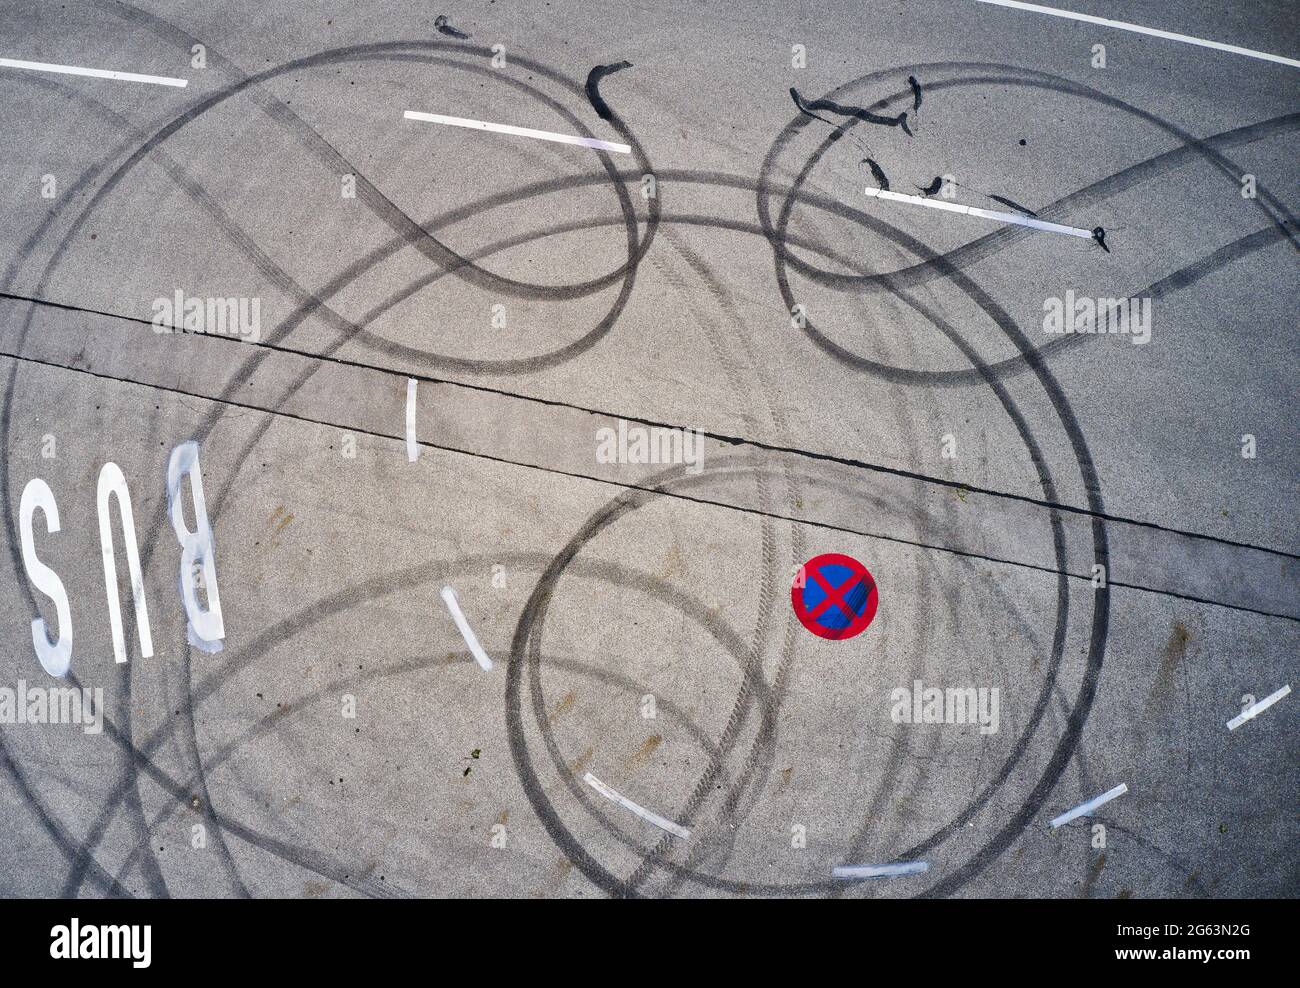 Marktoberdorf, Germany. 02nd July, 2021. Marks on asphalt from spinning tires during a burnout on July 02, 2021 in Marktoberdorf, Germany. Photographer Credit: Peter Schatz/Alamy Live News Stock Photo